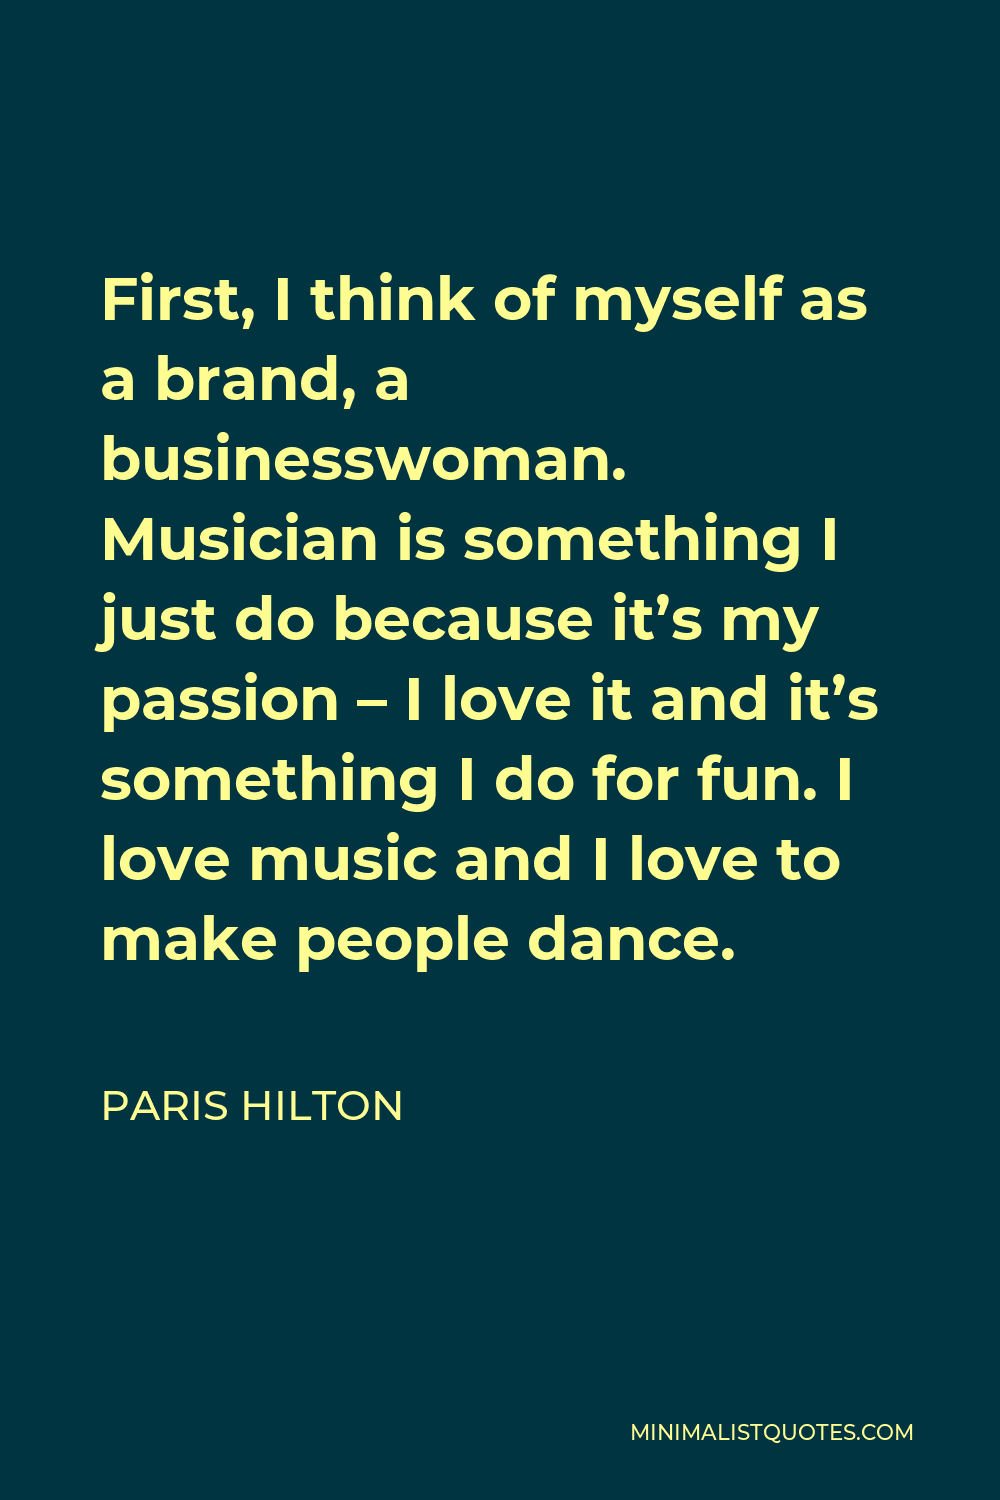 Paris Hilton Quote - First, I think of myself as a brand, a businesswoman. Musician is something I just do because it’s my passion – I love it and it’s something I do for fun. I love music and I love to make people dance.